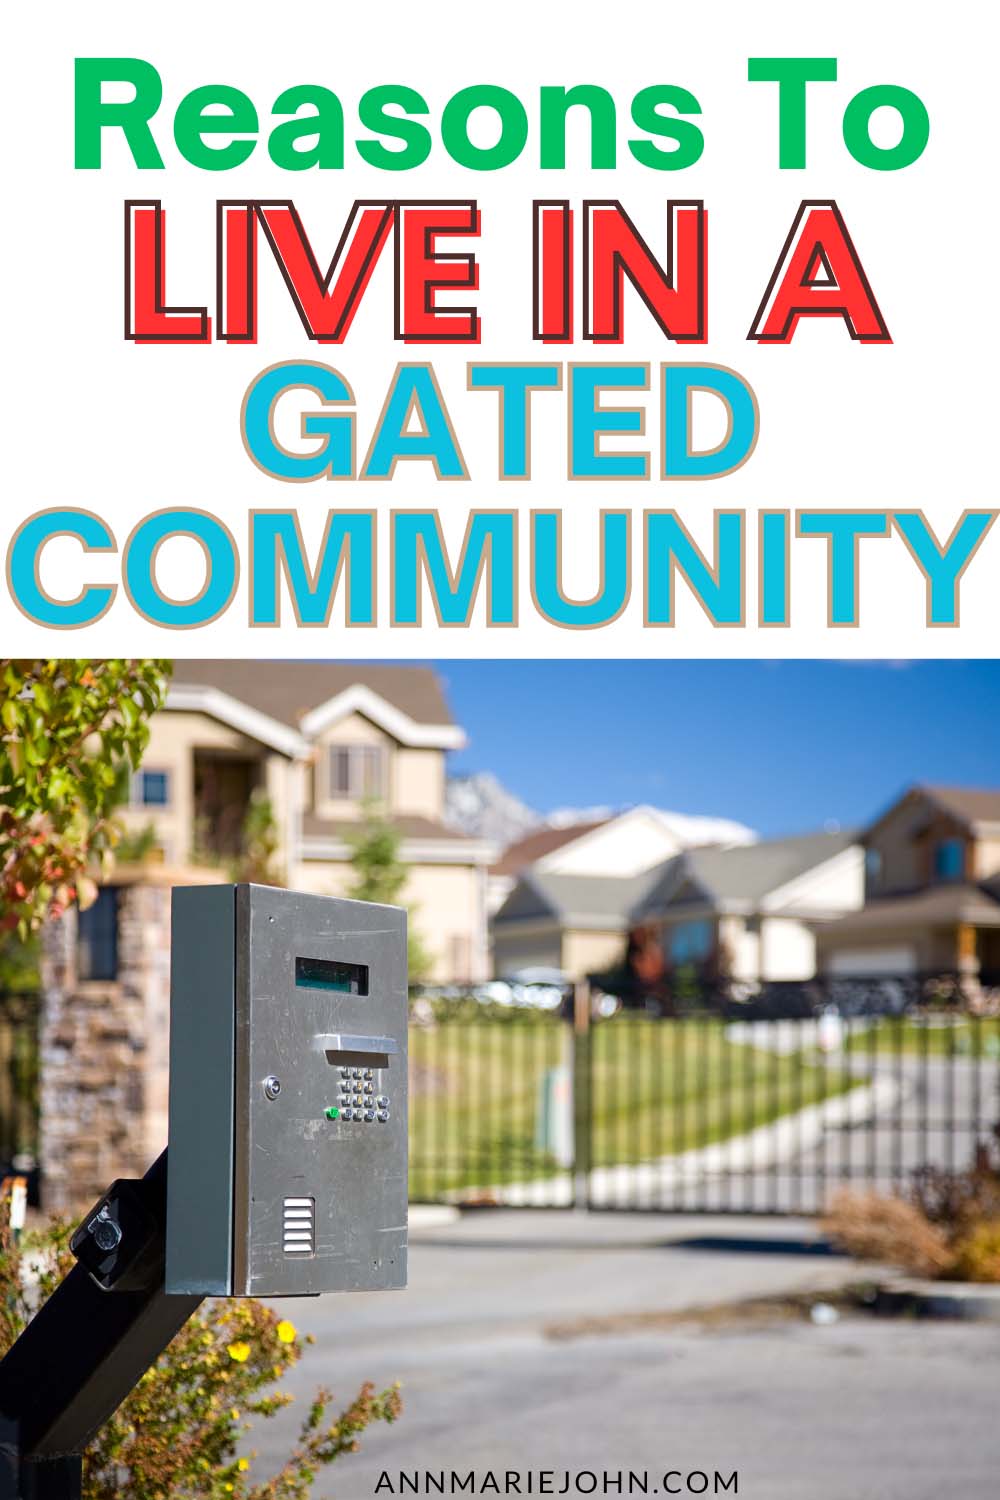 Reasons to Live in a Gated Community